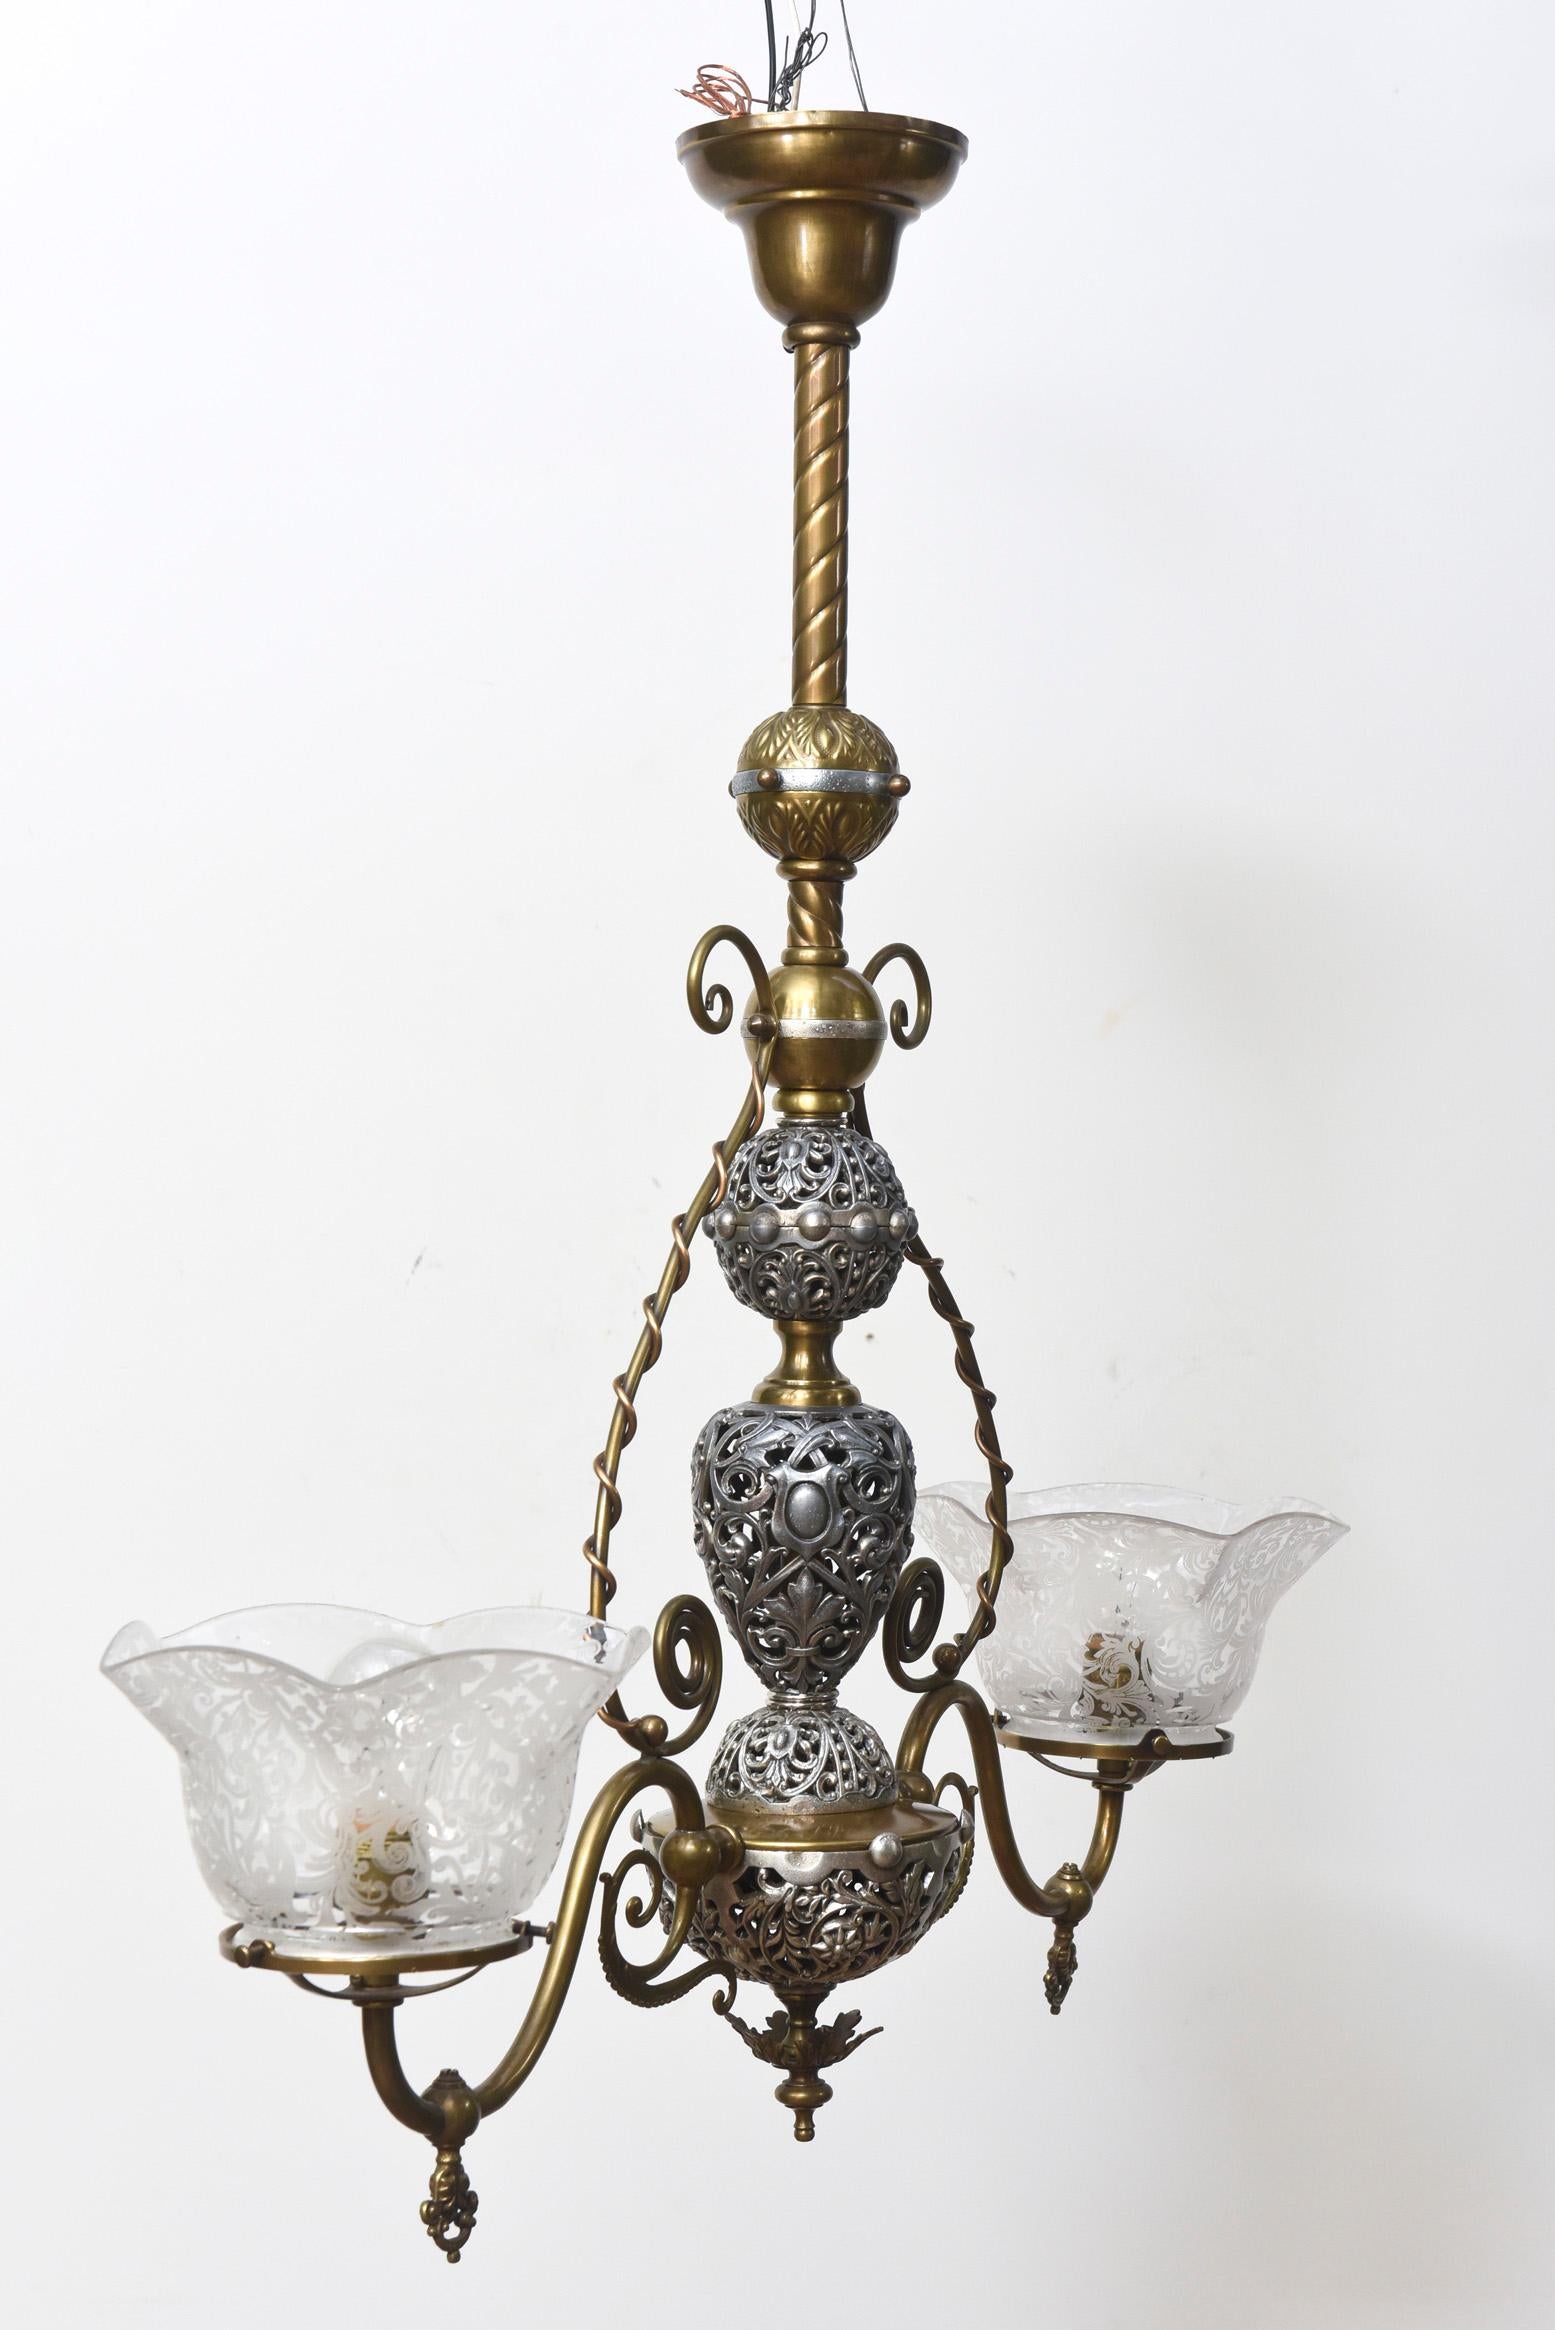 Two Light Victorian Brass and Nickel Fixture 1